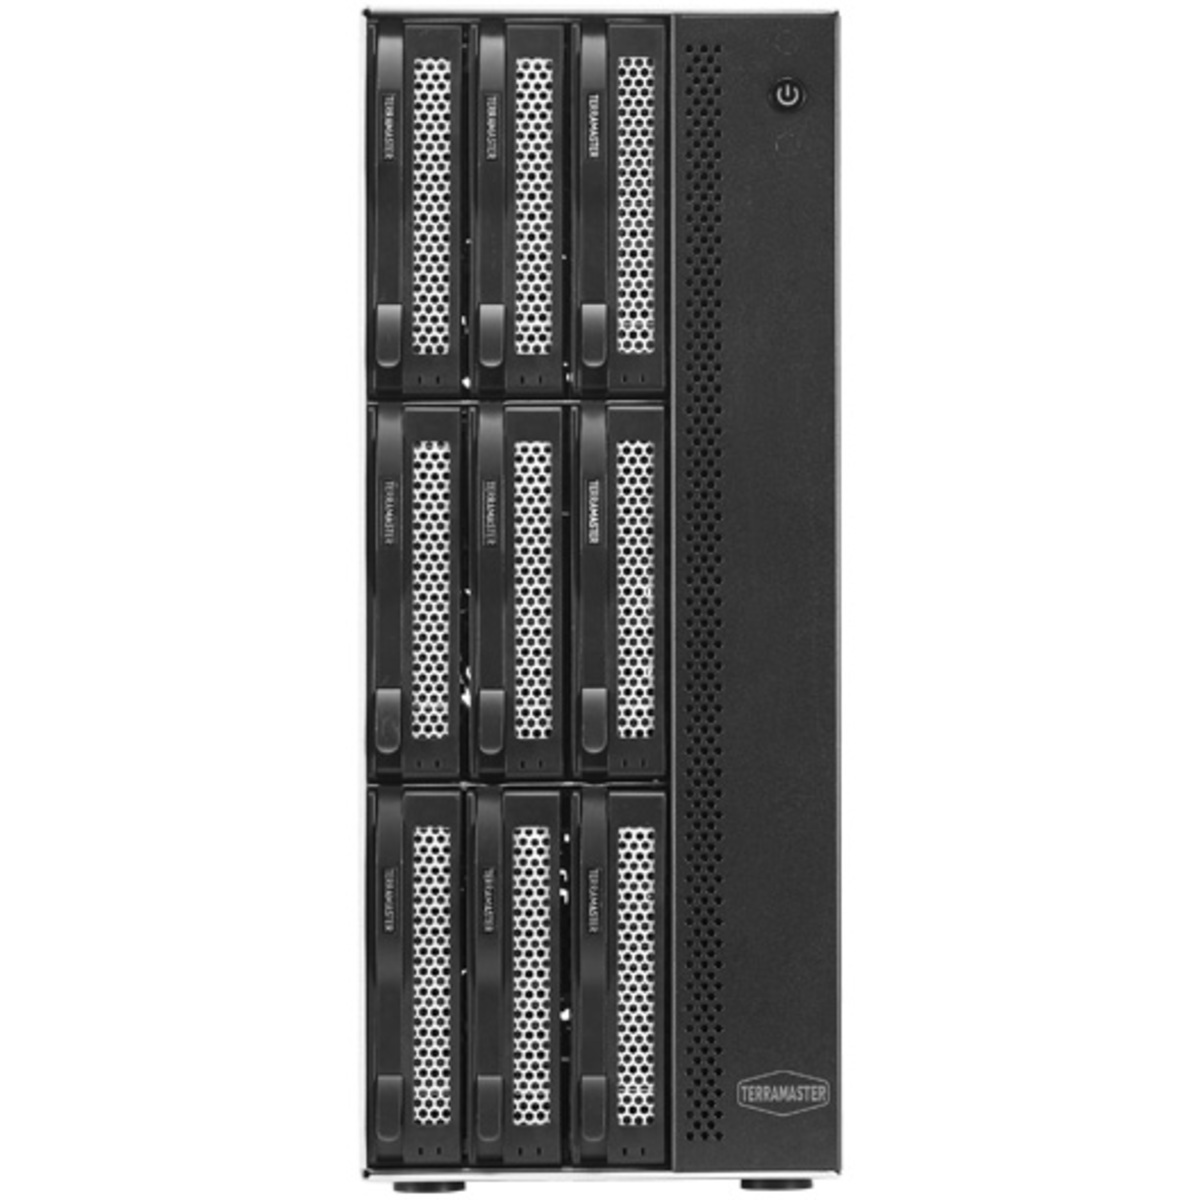 TerraMaster T9-450 60tb 9-Bay Desktop Multimedia / Power User / Business NAS - Network Attached Storage Device 6x10tb Western Digital Red Plus WD101EFBX 3.5 7200rpm SATA 6Gb/s HDD NAS Class Drives Installed - Burn-In Tested T9-450